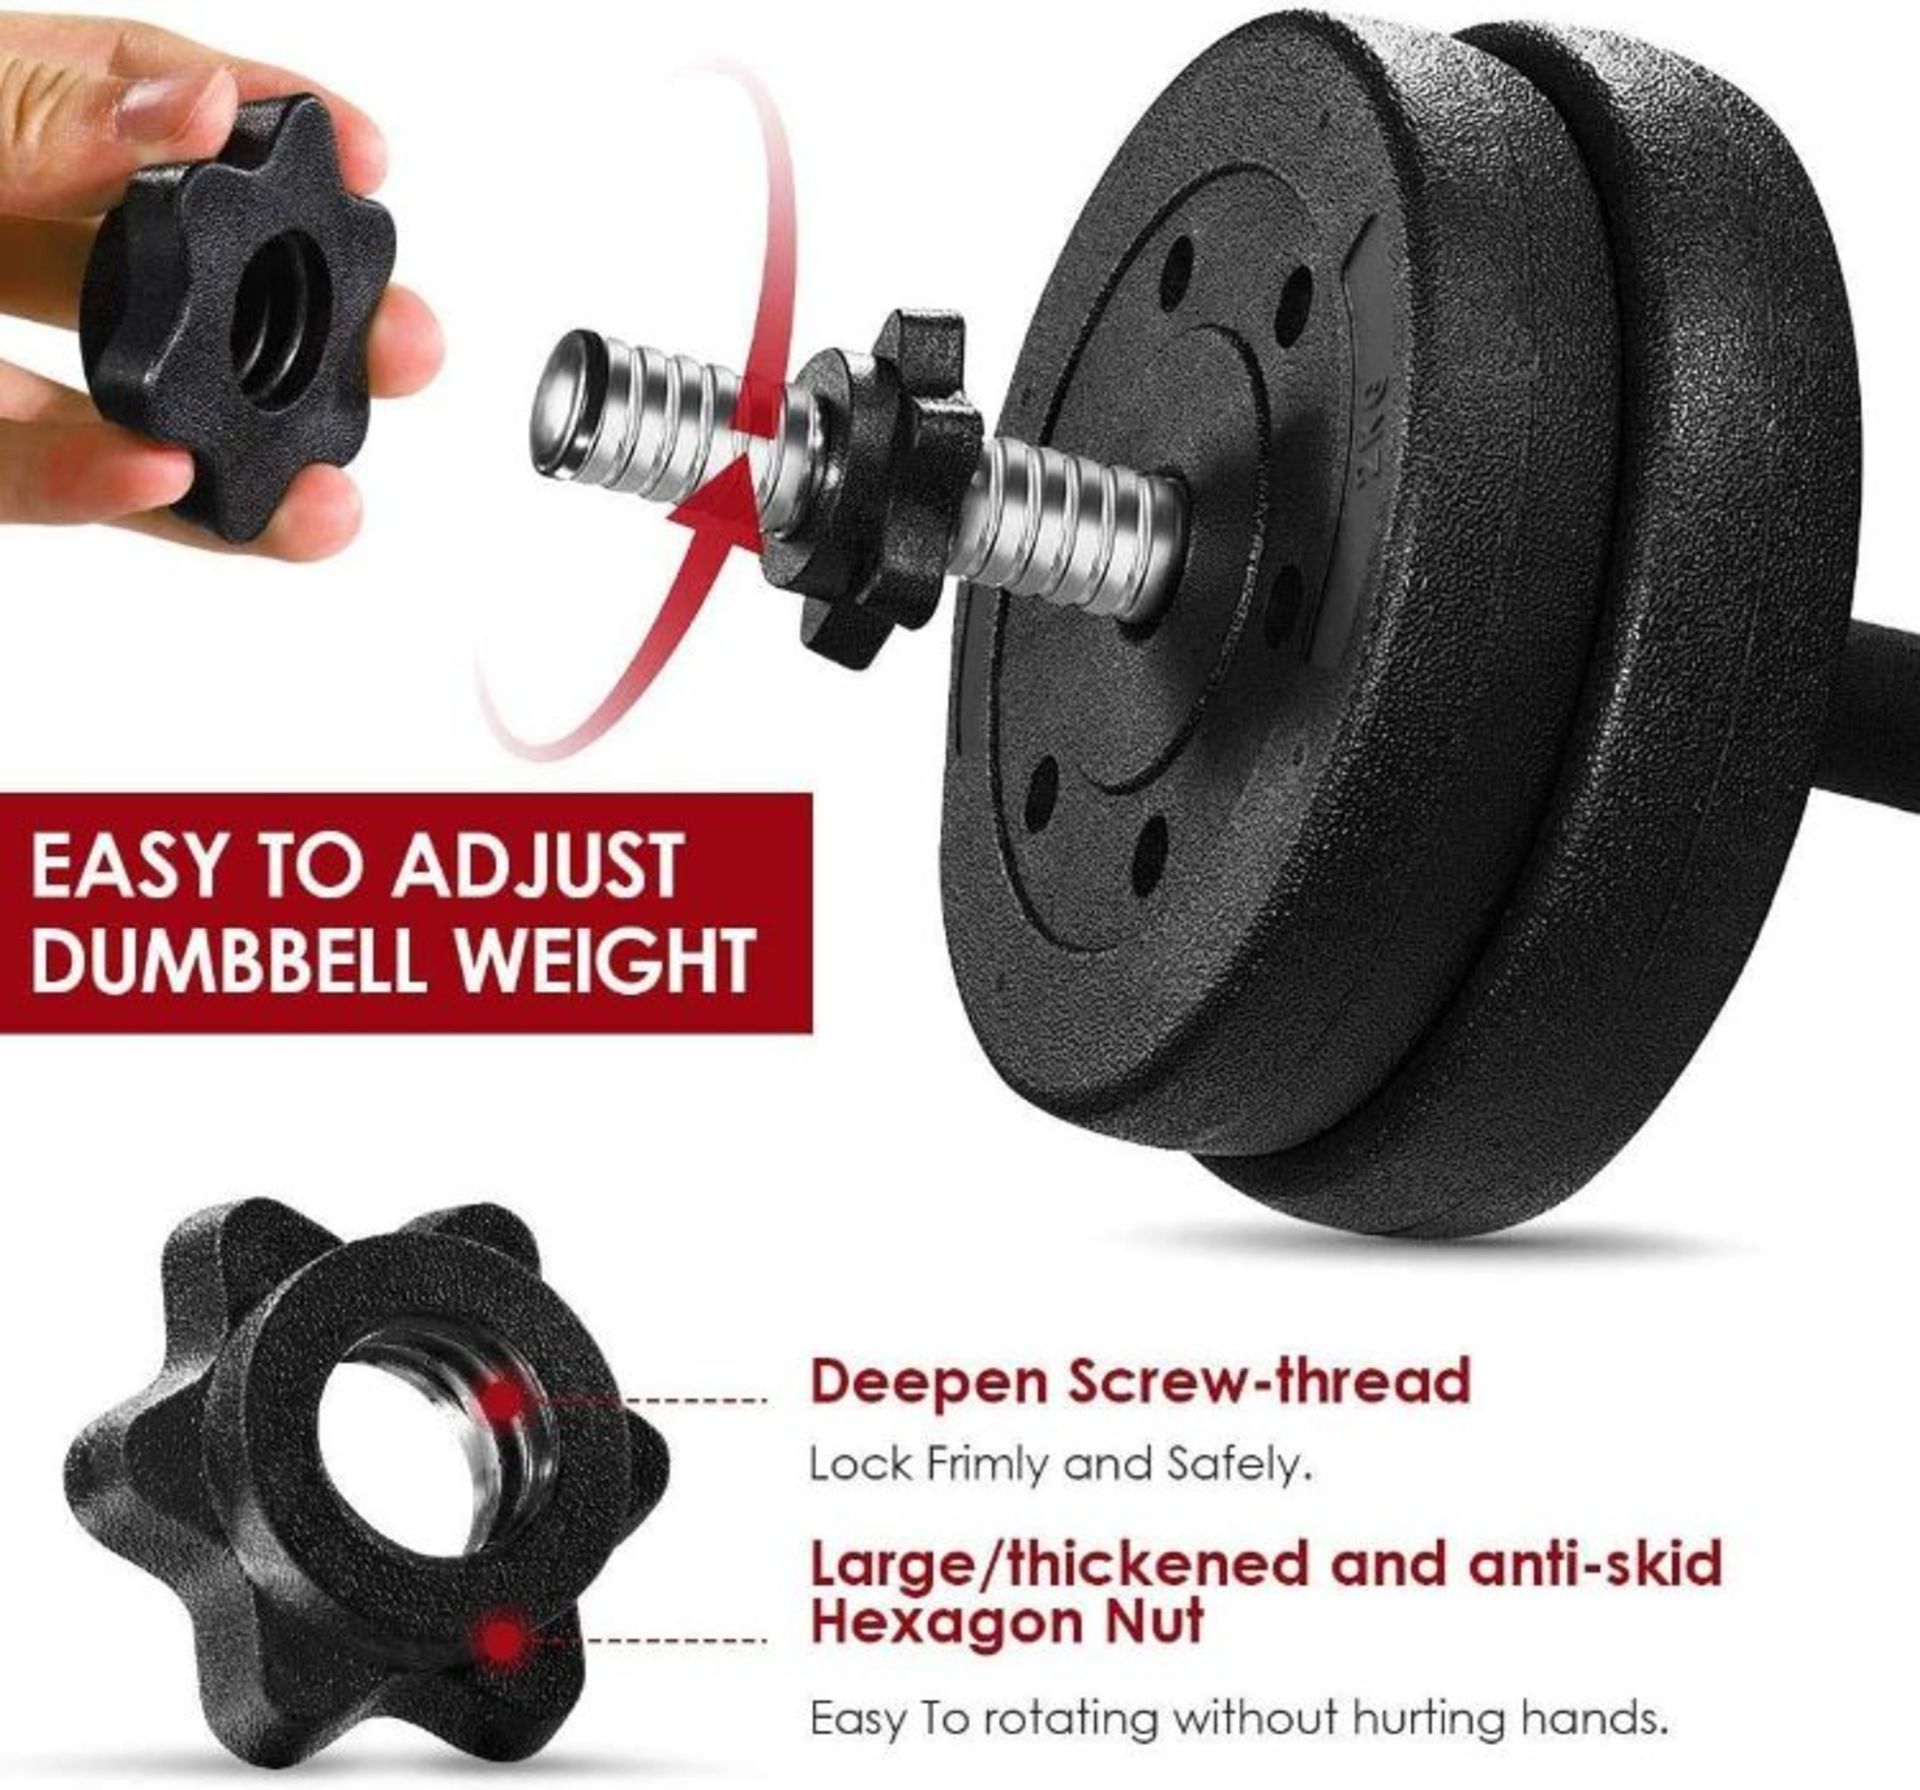 1x Movtotop 30KG adjustable Dumb Bell weight set, new and boxed, we can only find these in America - Image 3 of 6